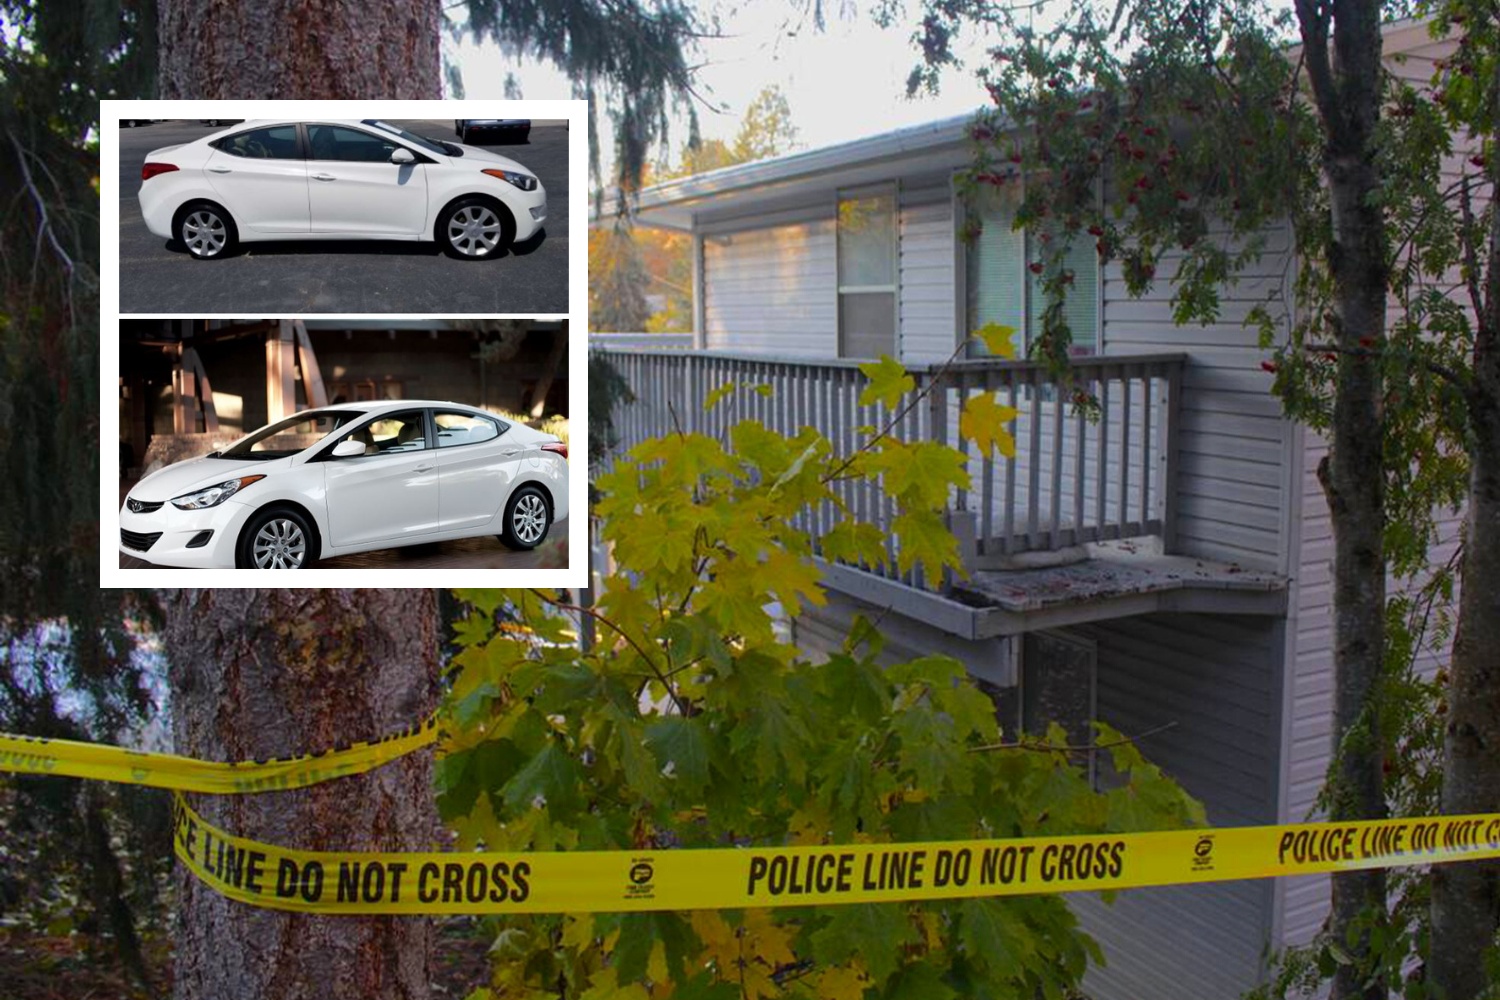 Idaho Murders Update: Police Alerted to Abandoned White Car Found in Oregon